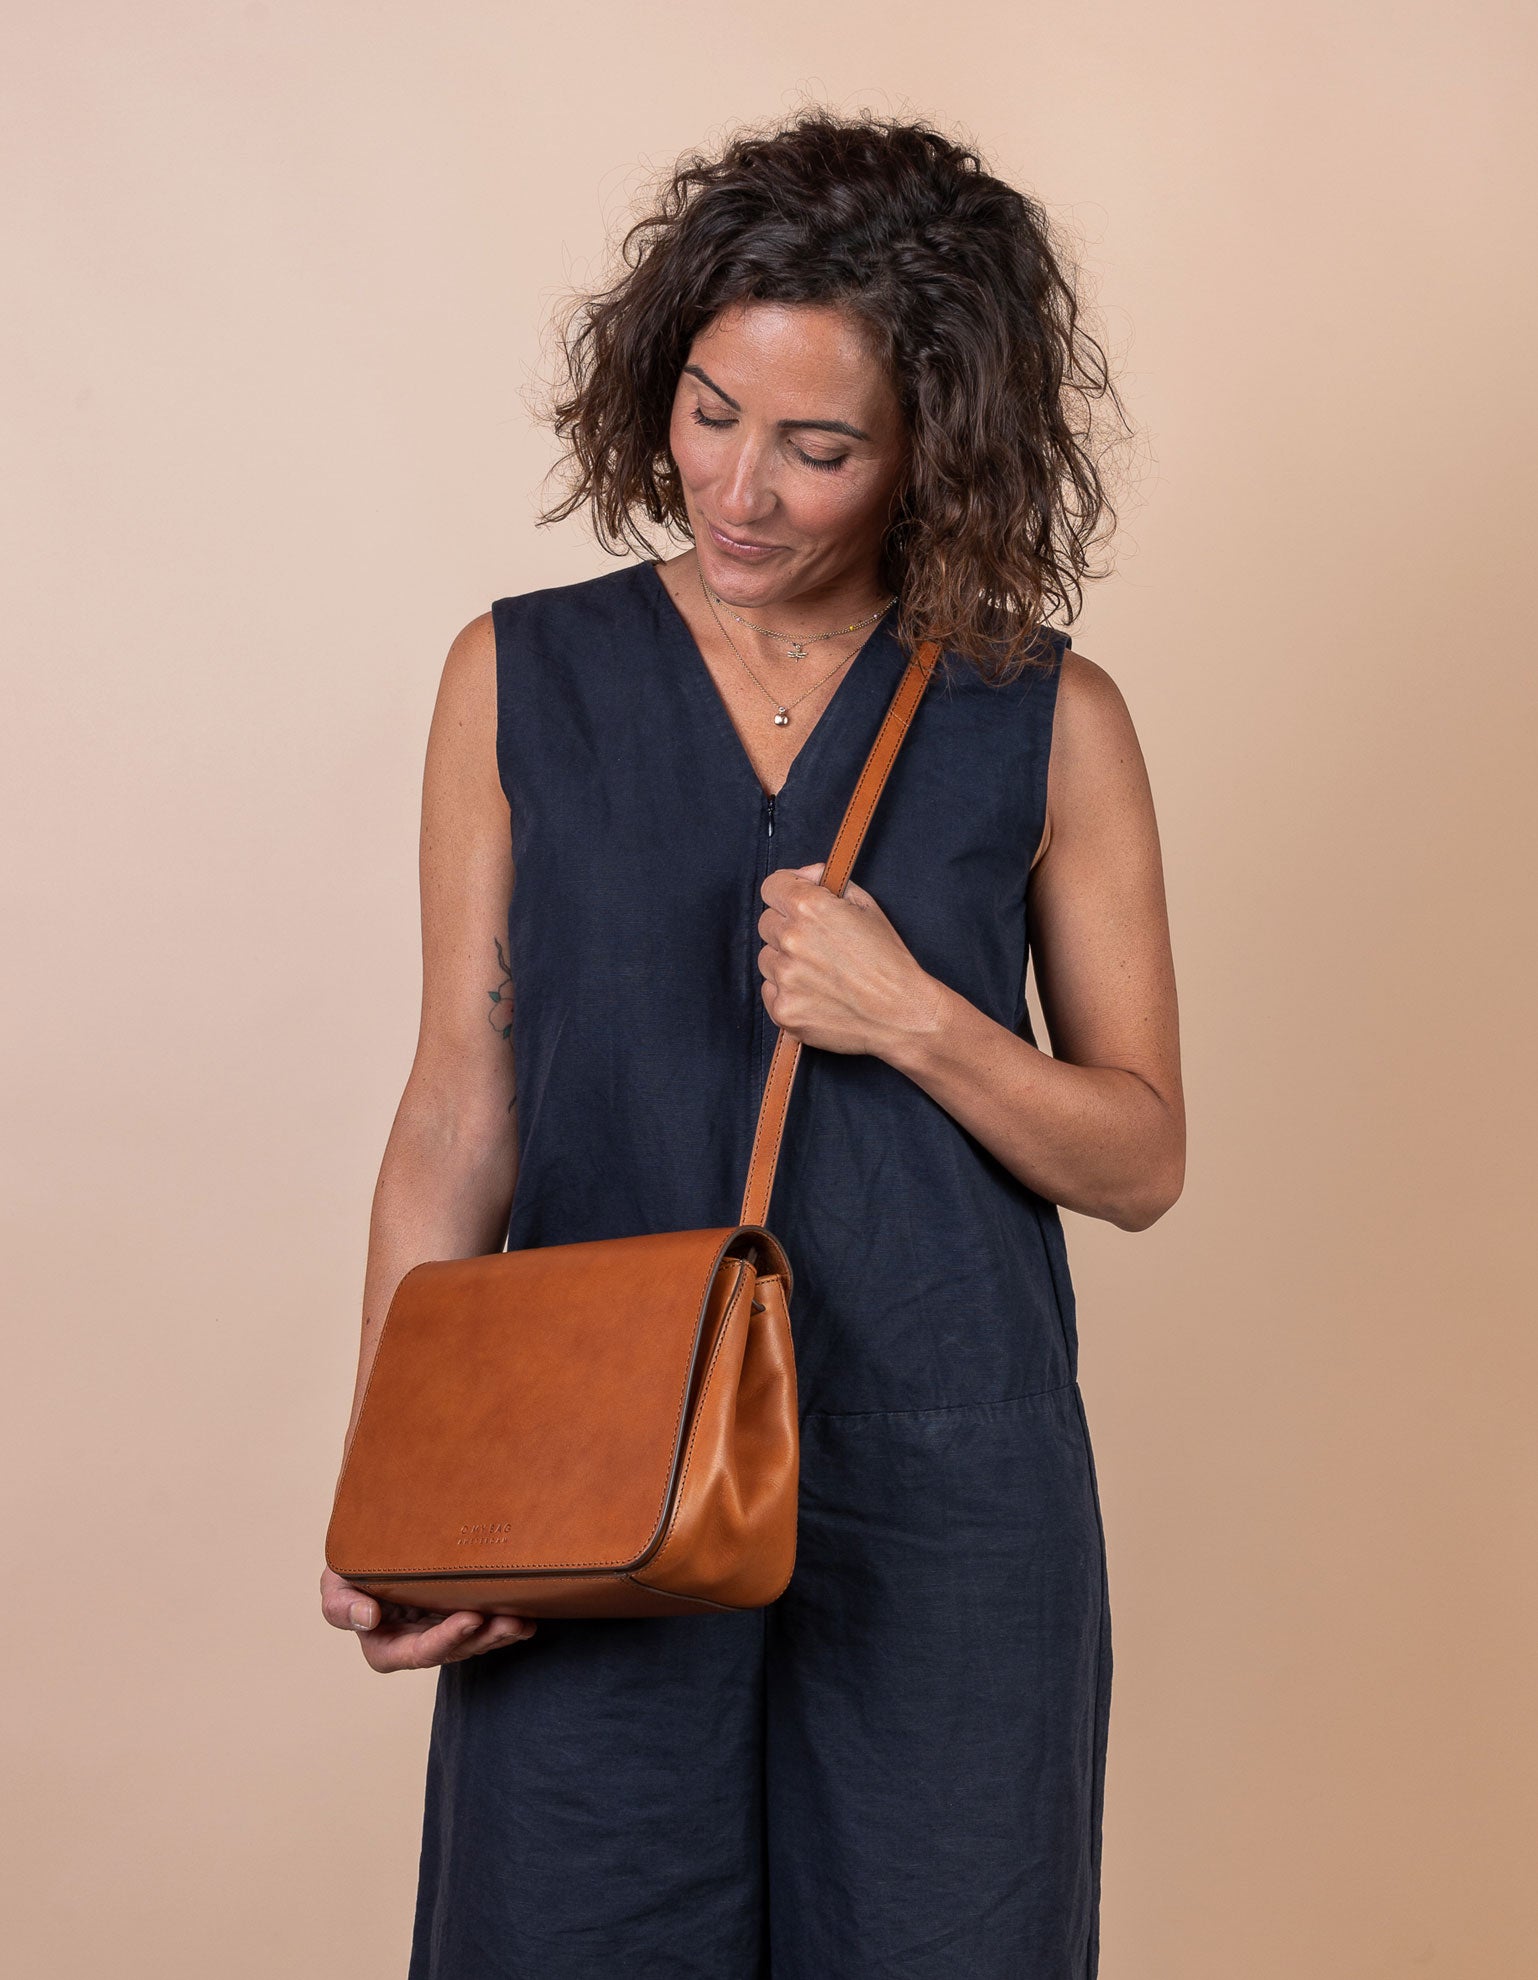 Lucy Cognac Classic Leather Handbag. Second model product image.